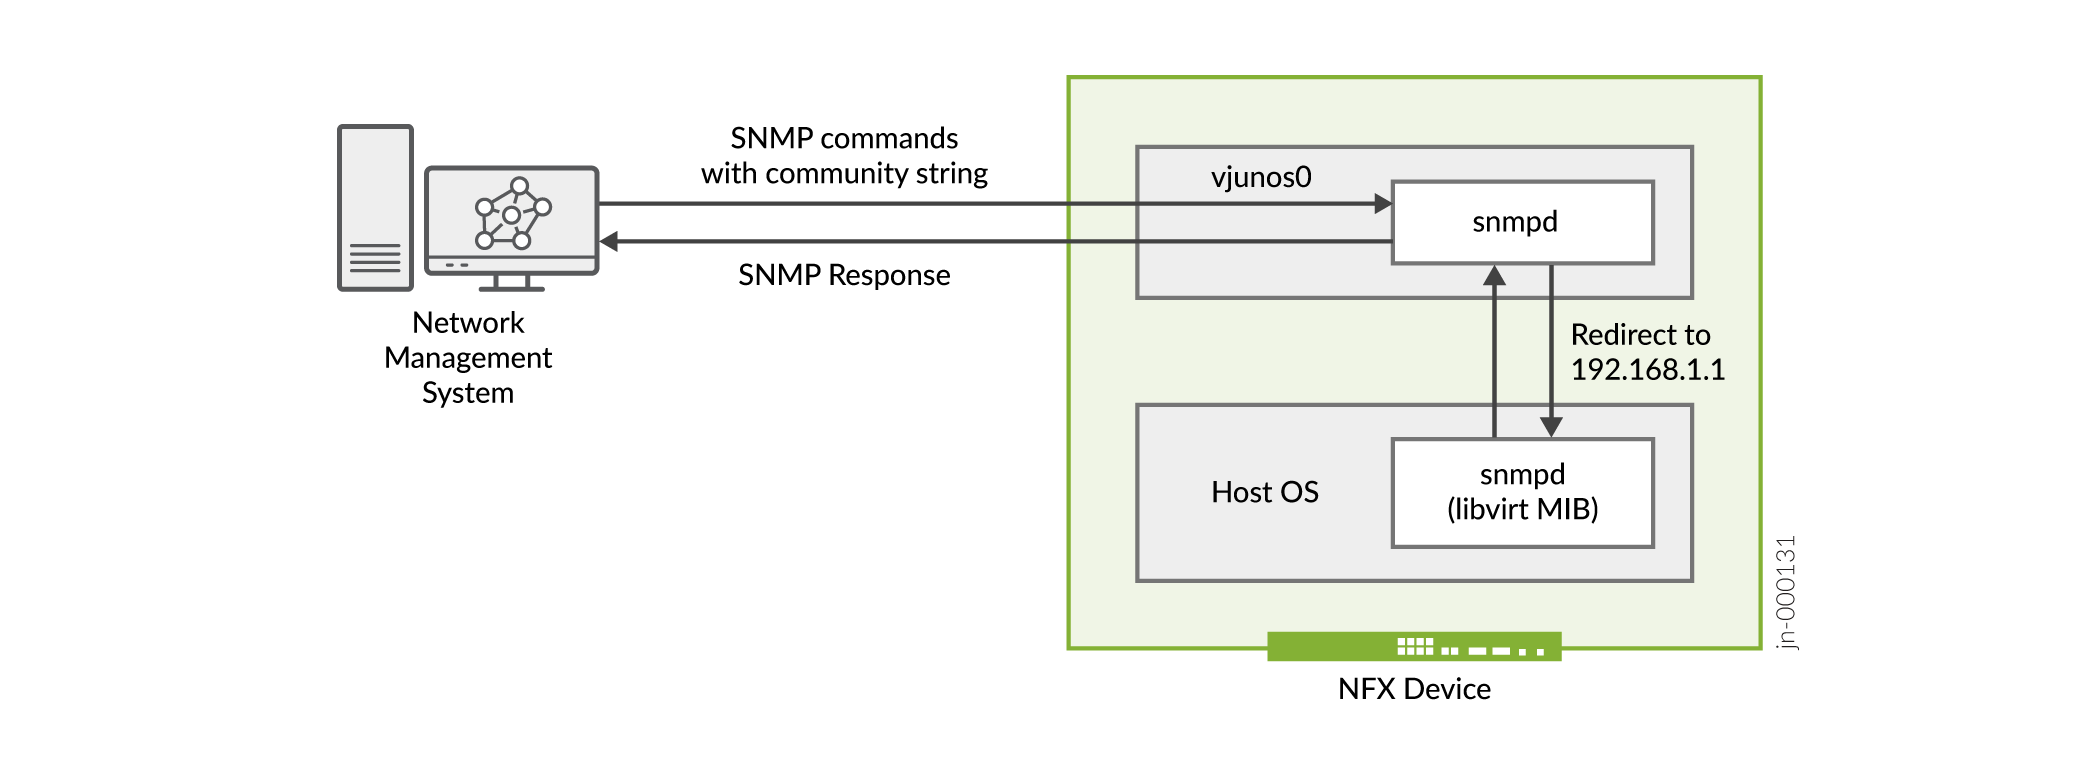 Communication Flow for SNMPv2c on NFX Series Devices